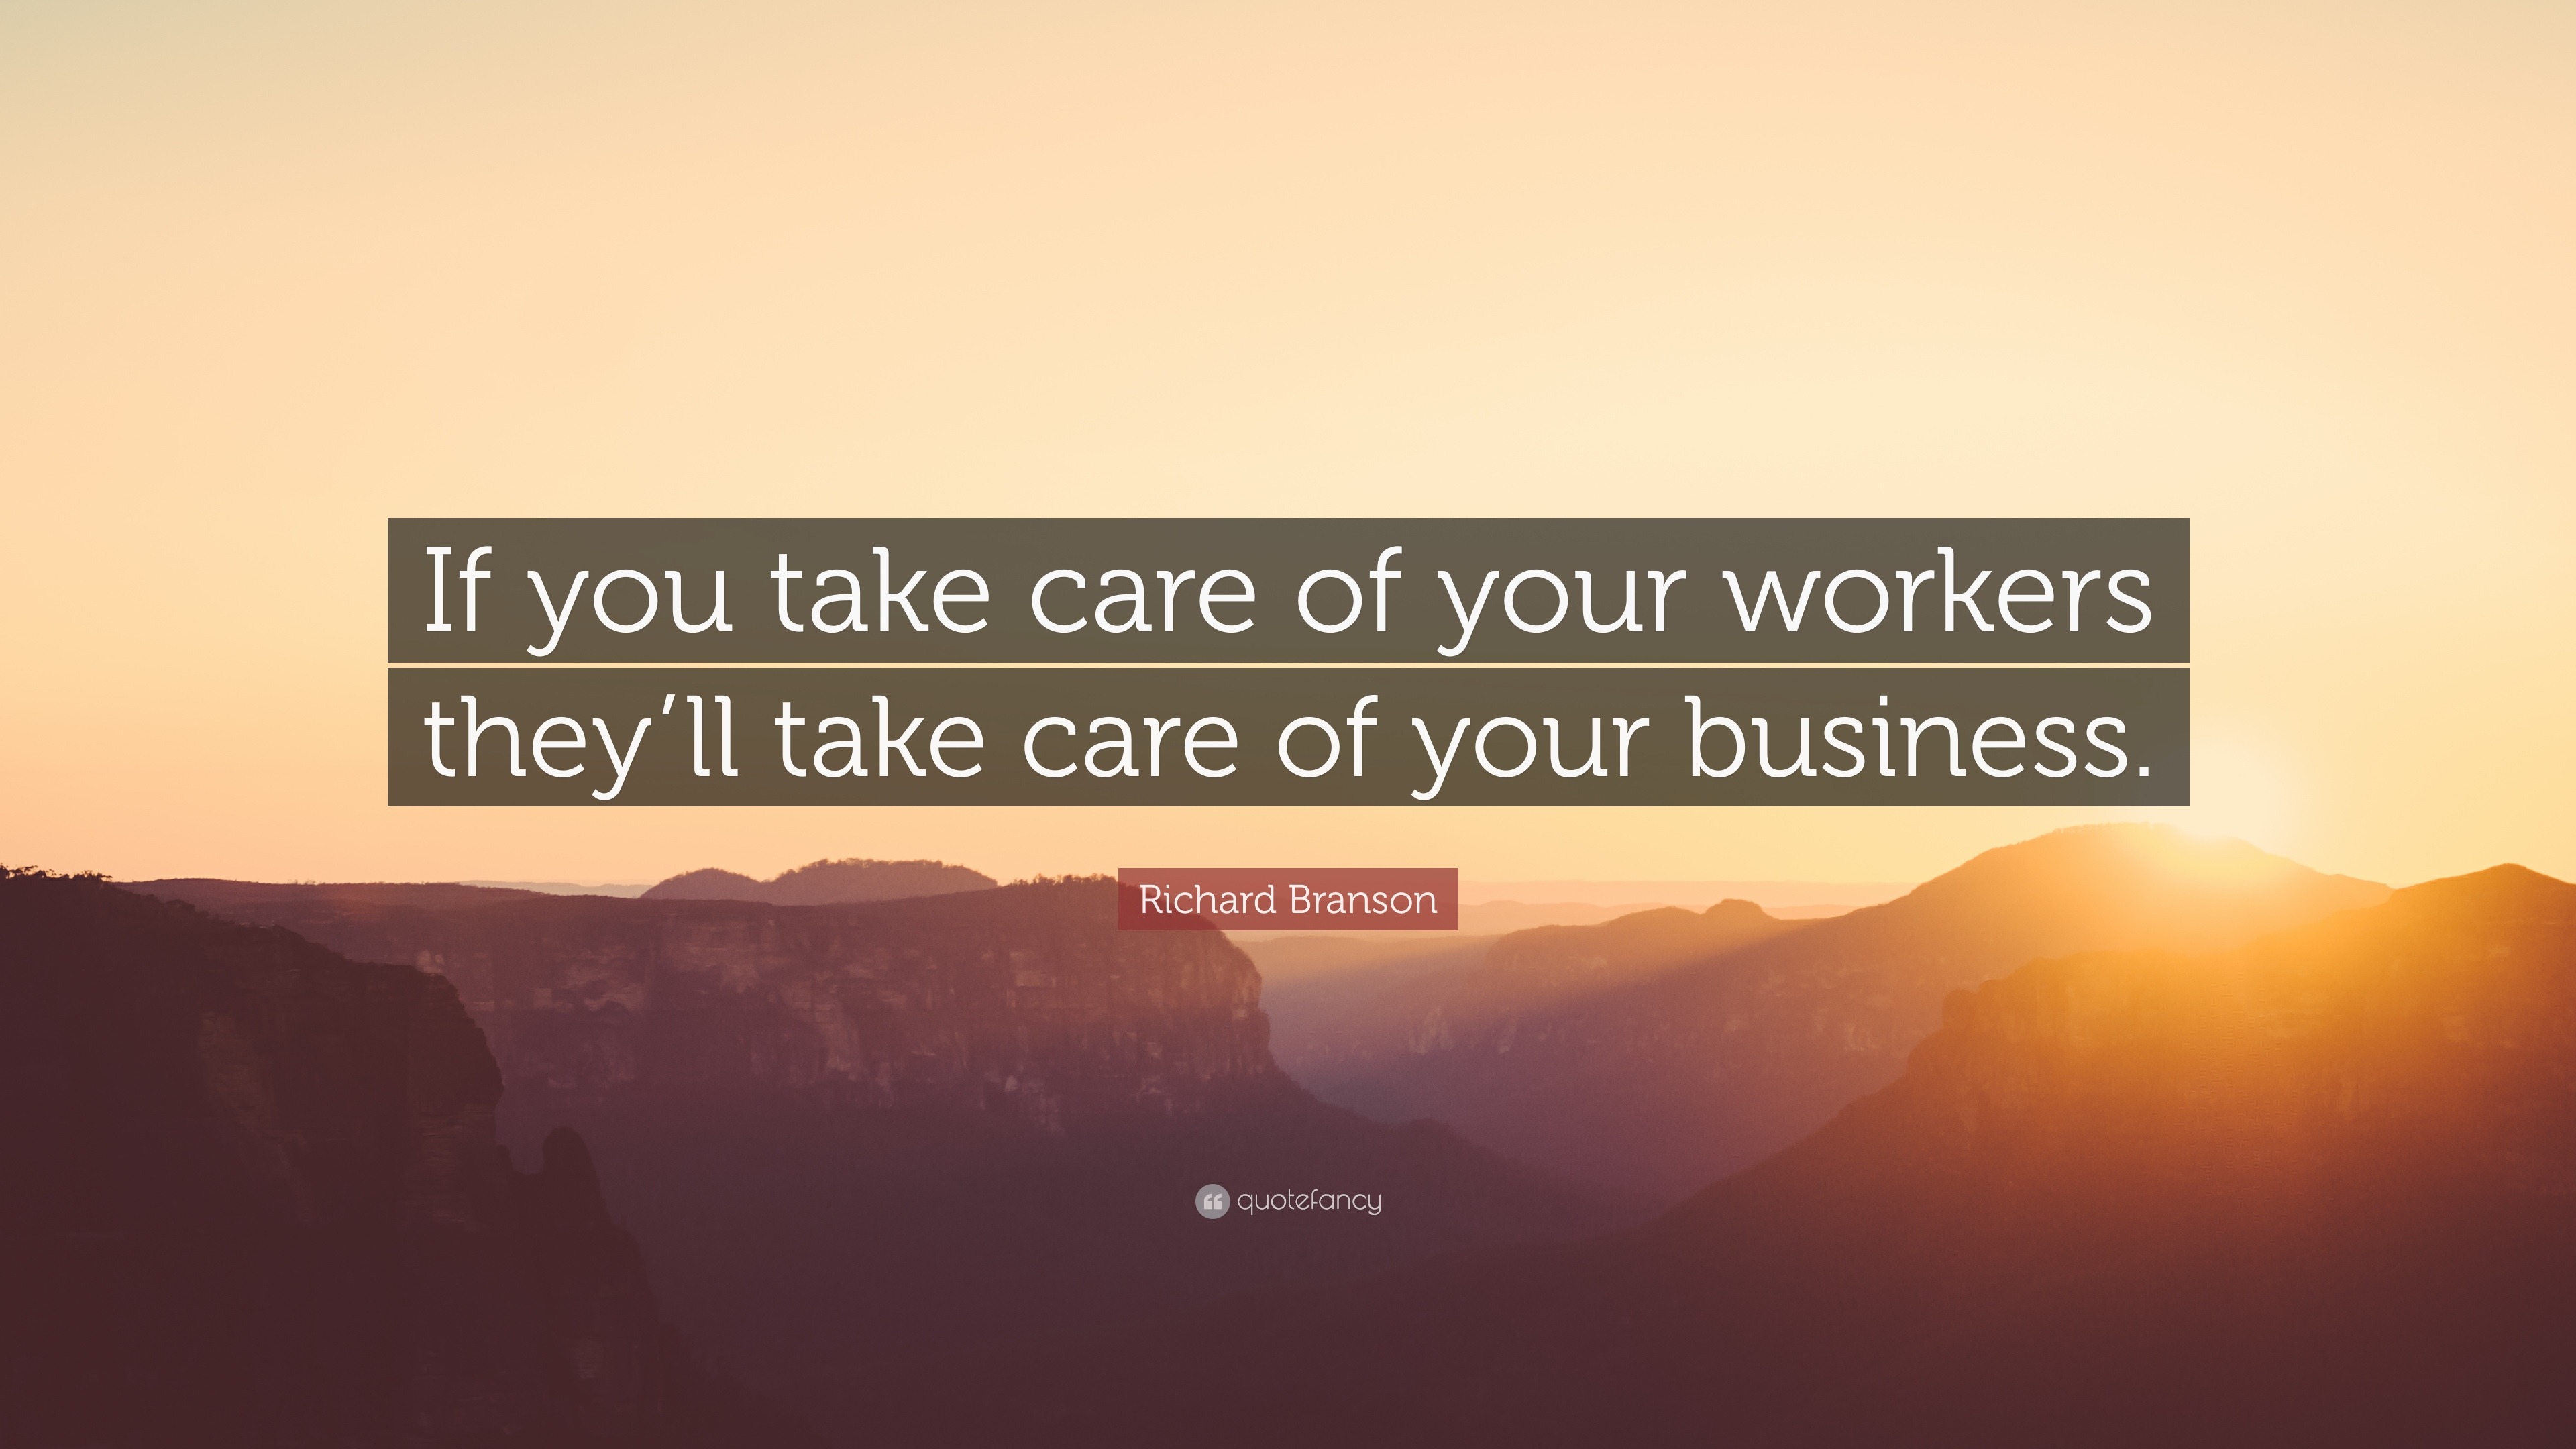 Richard Branson Quote: “If You Take Care Of Your Workers They'll Take Care Of Your